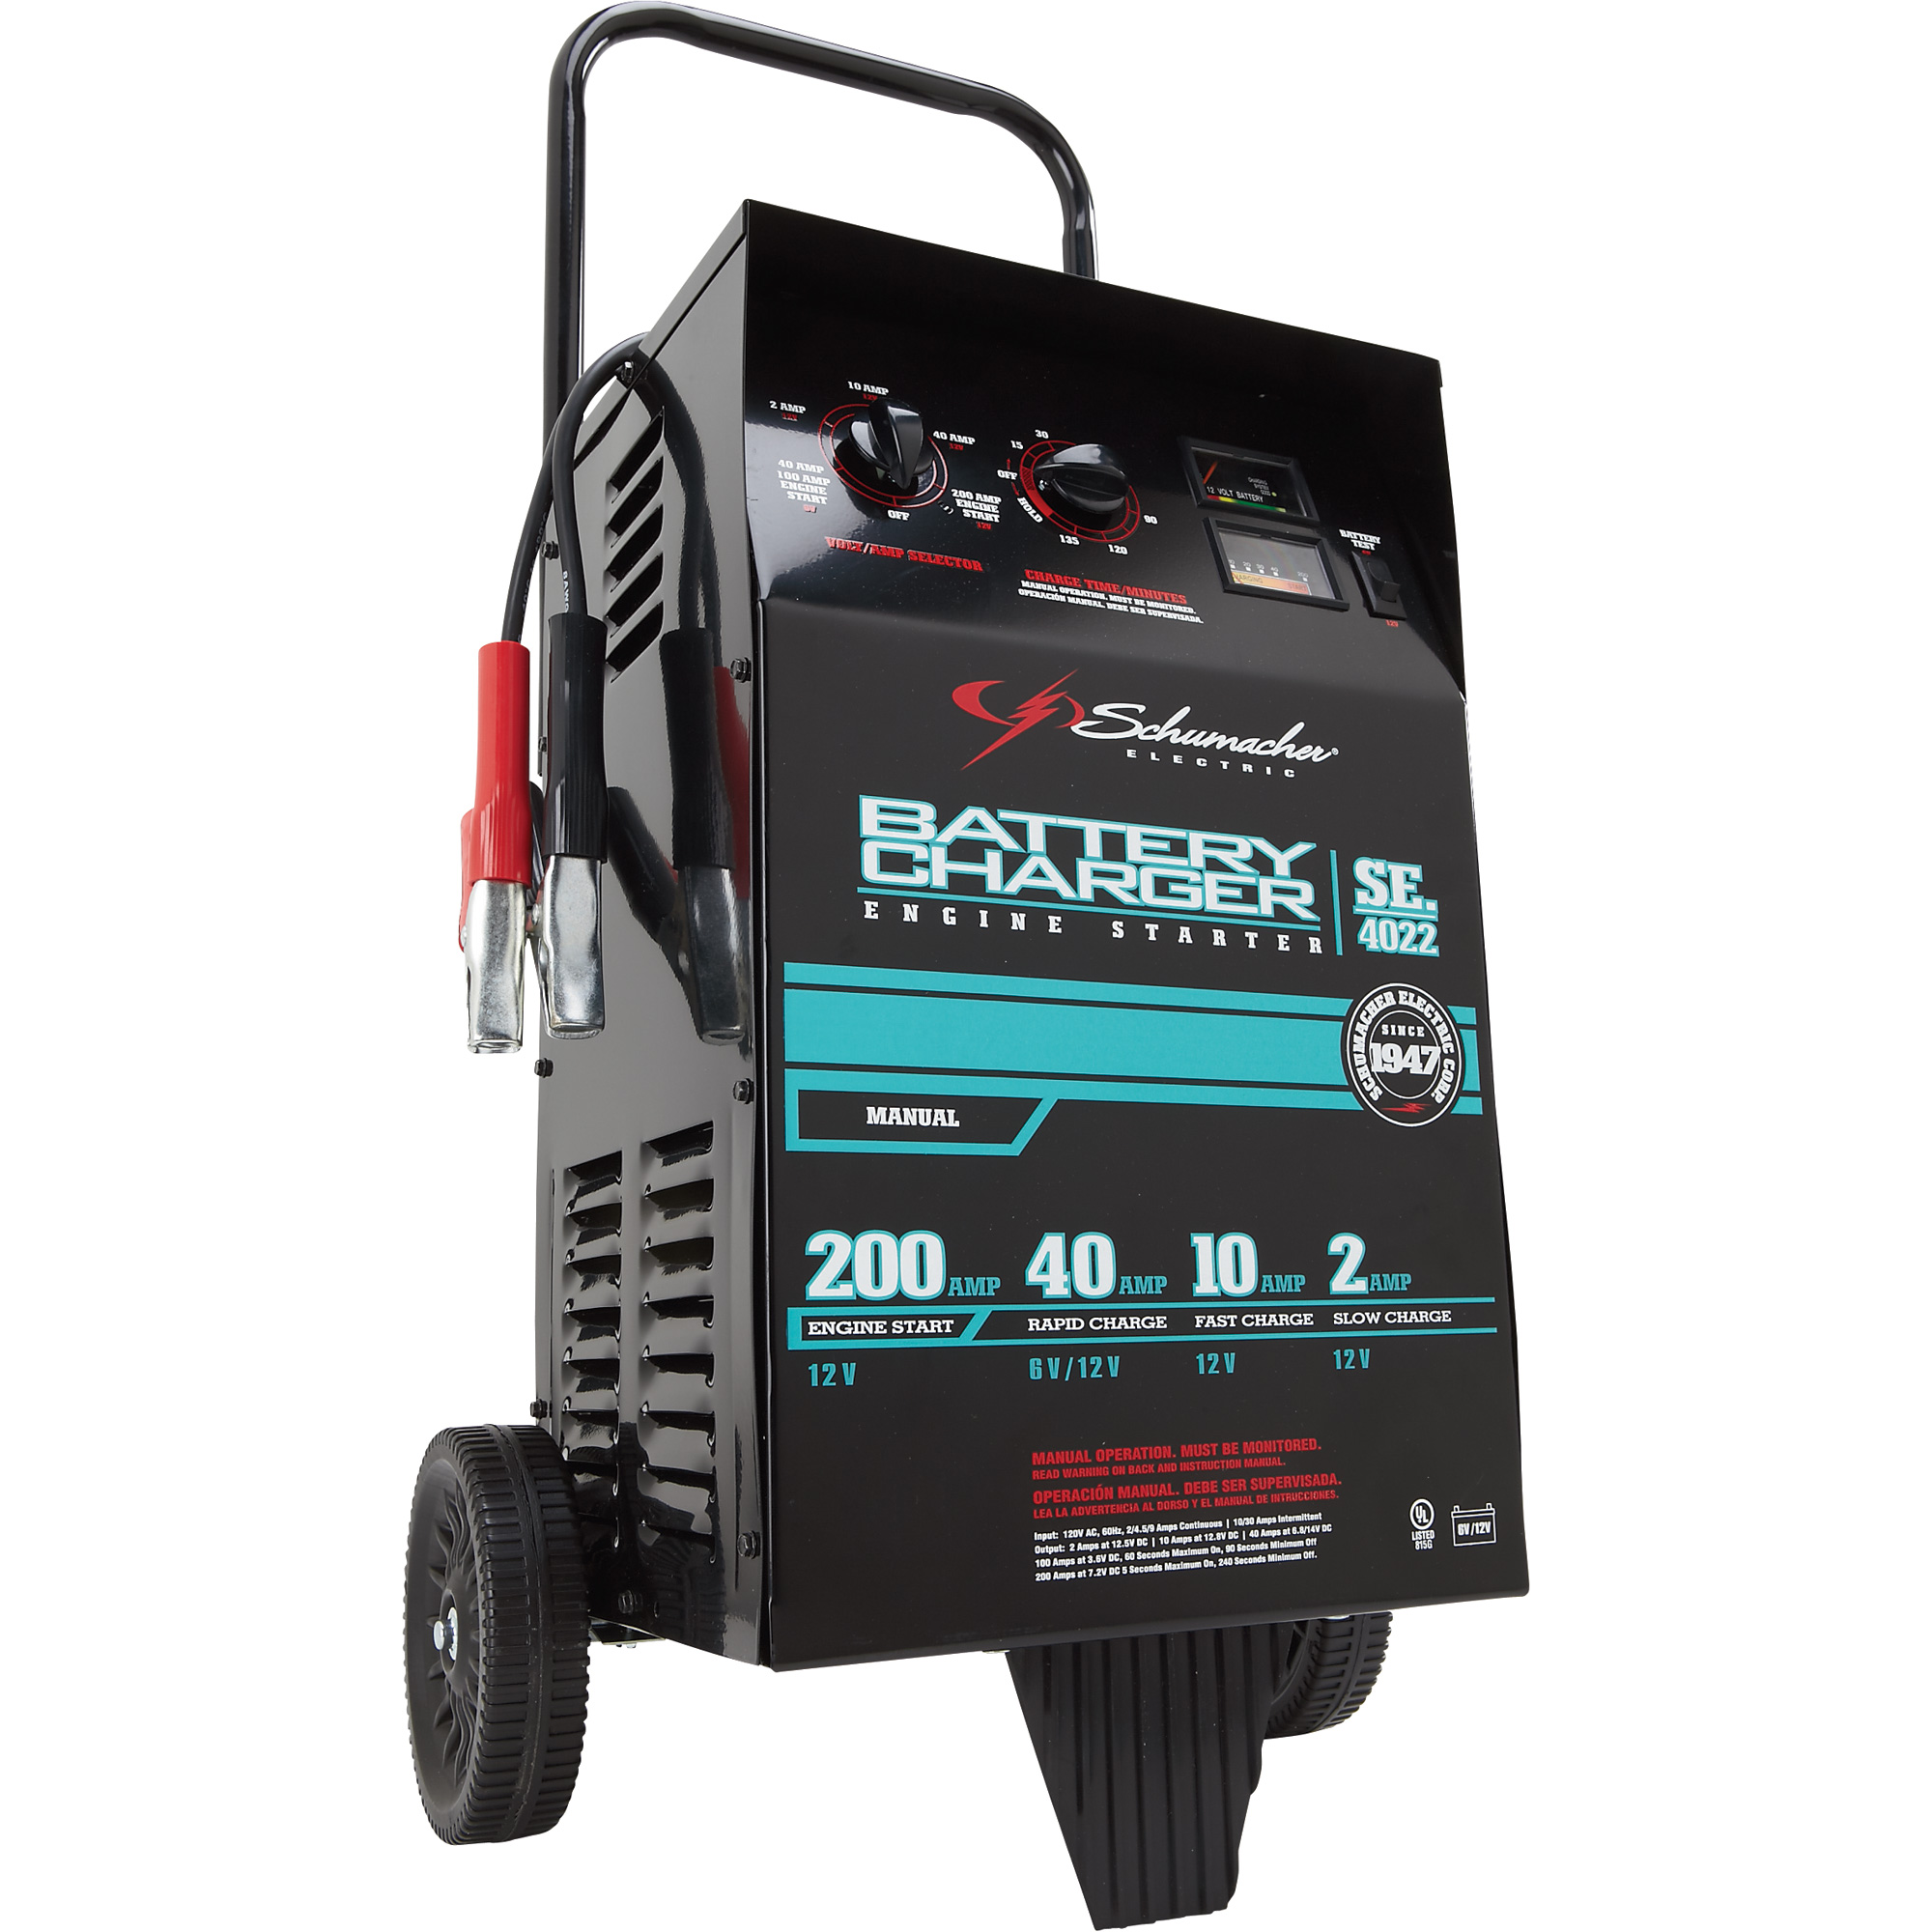 Tools Battery Charger Mt6340 Manual